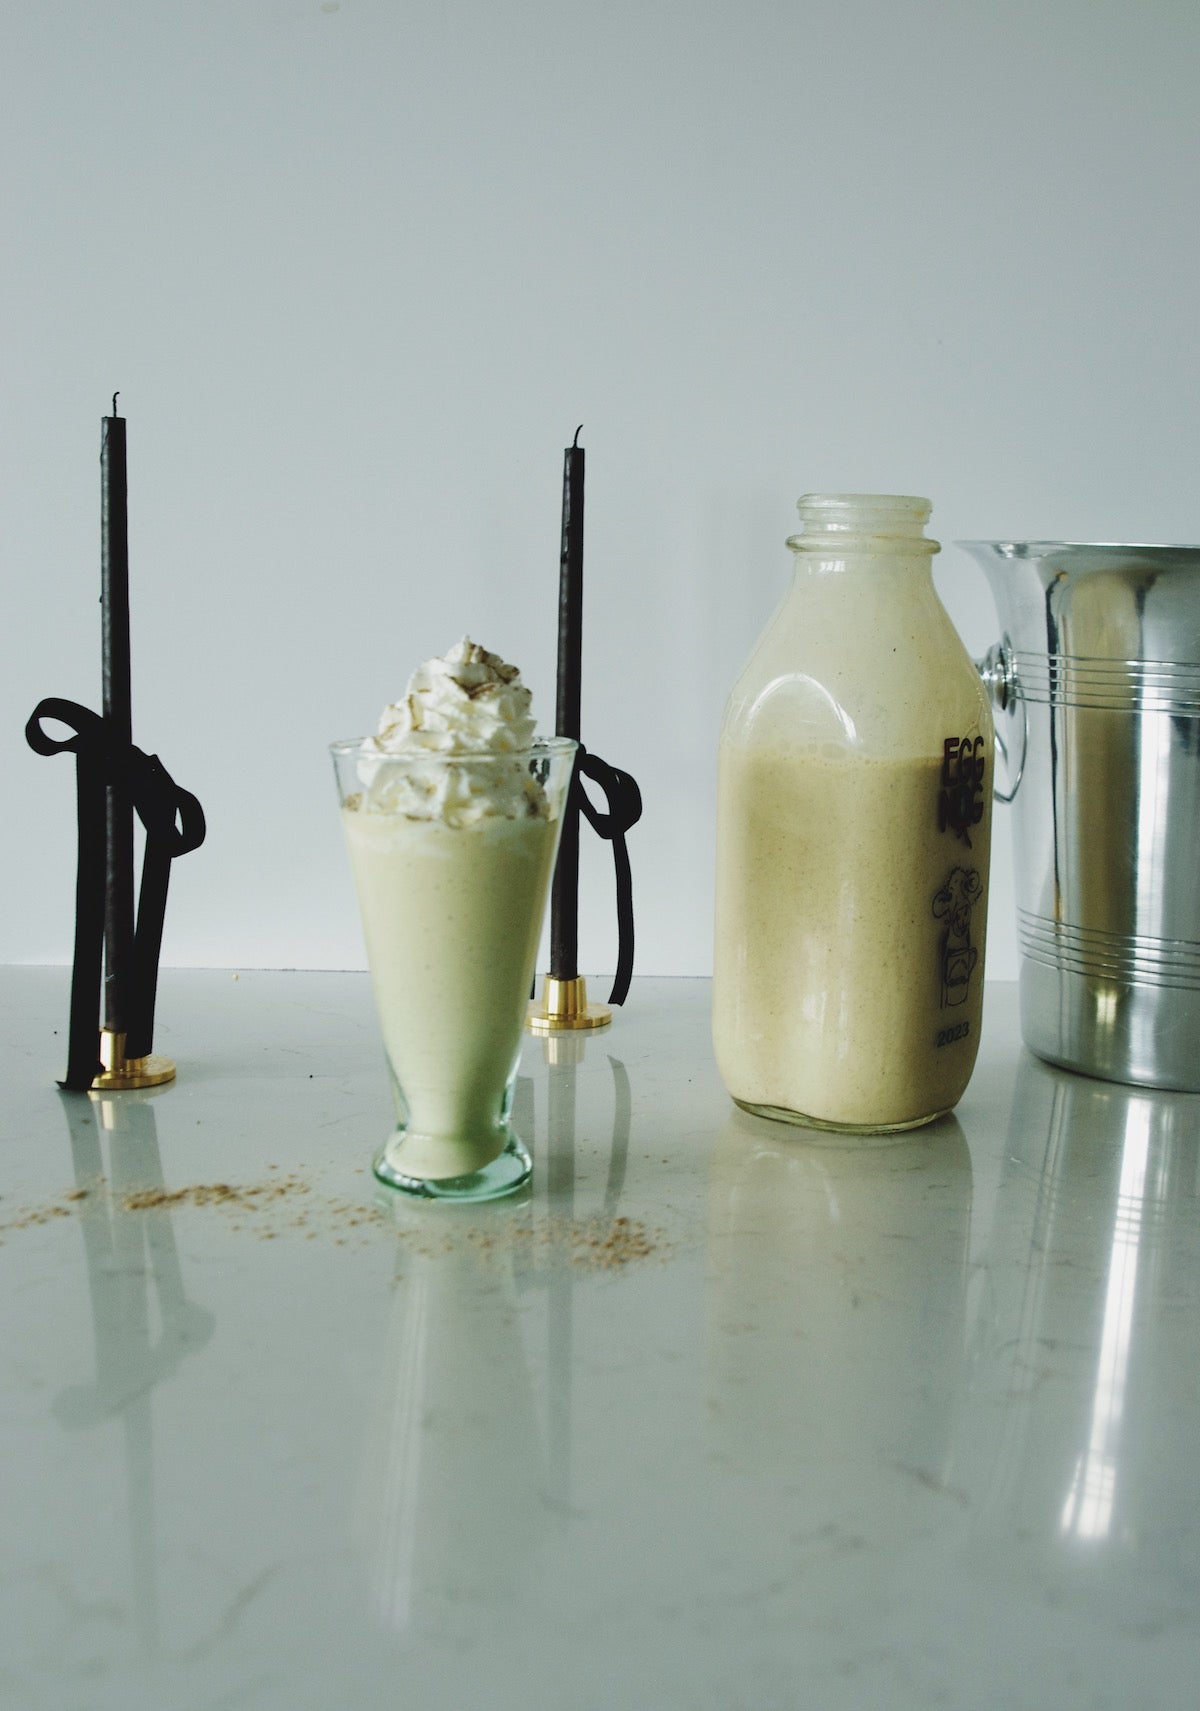 Milkshake with whipped cream in a glass flute, vintage milk bottle, metal pitcher, and ribbon-tied candles on marble.